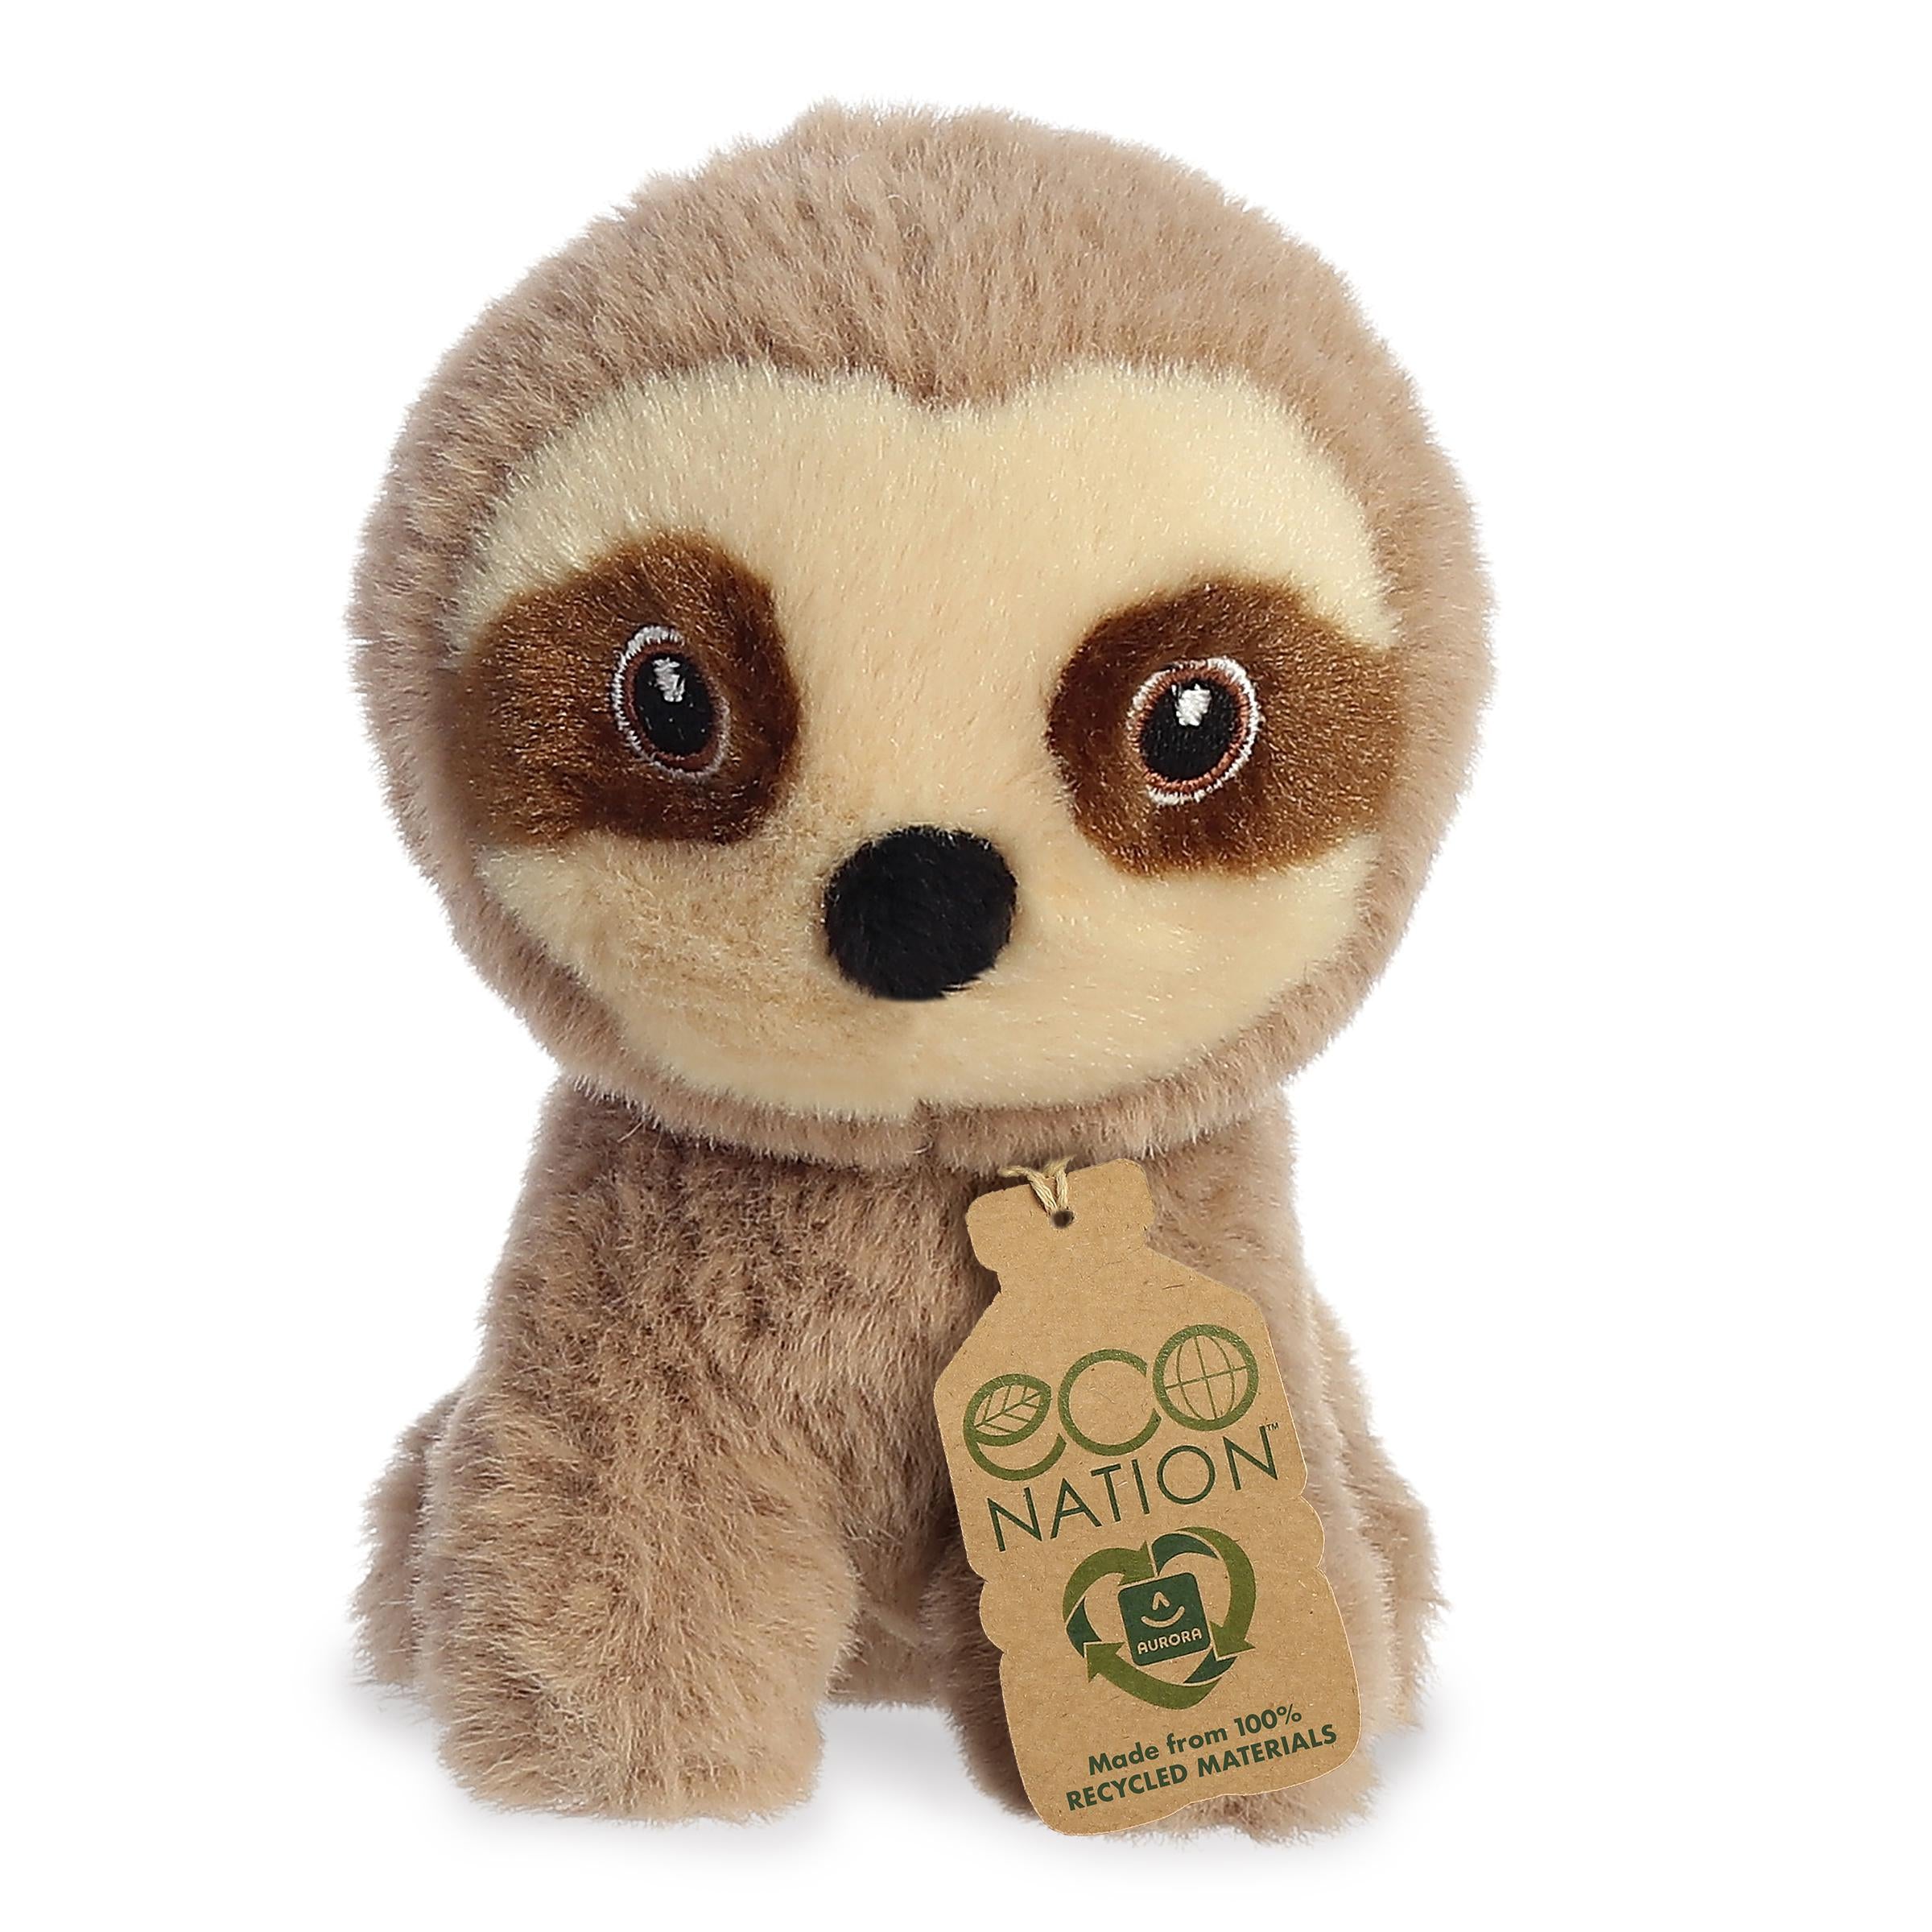 A lovable mini sloth with light brown fur and a black nose, adorable embroidered eyes, and an eco-nation tag